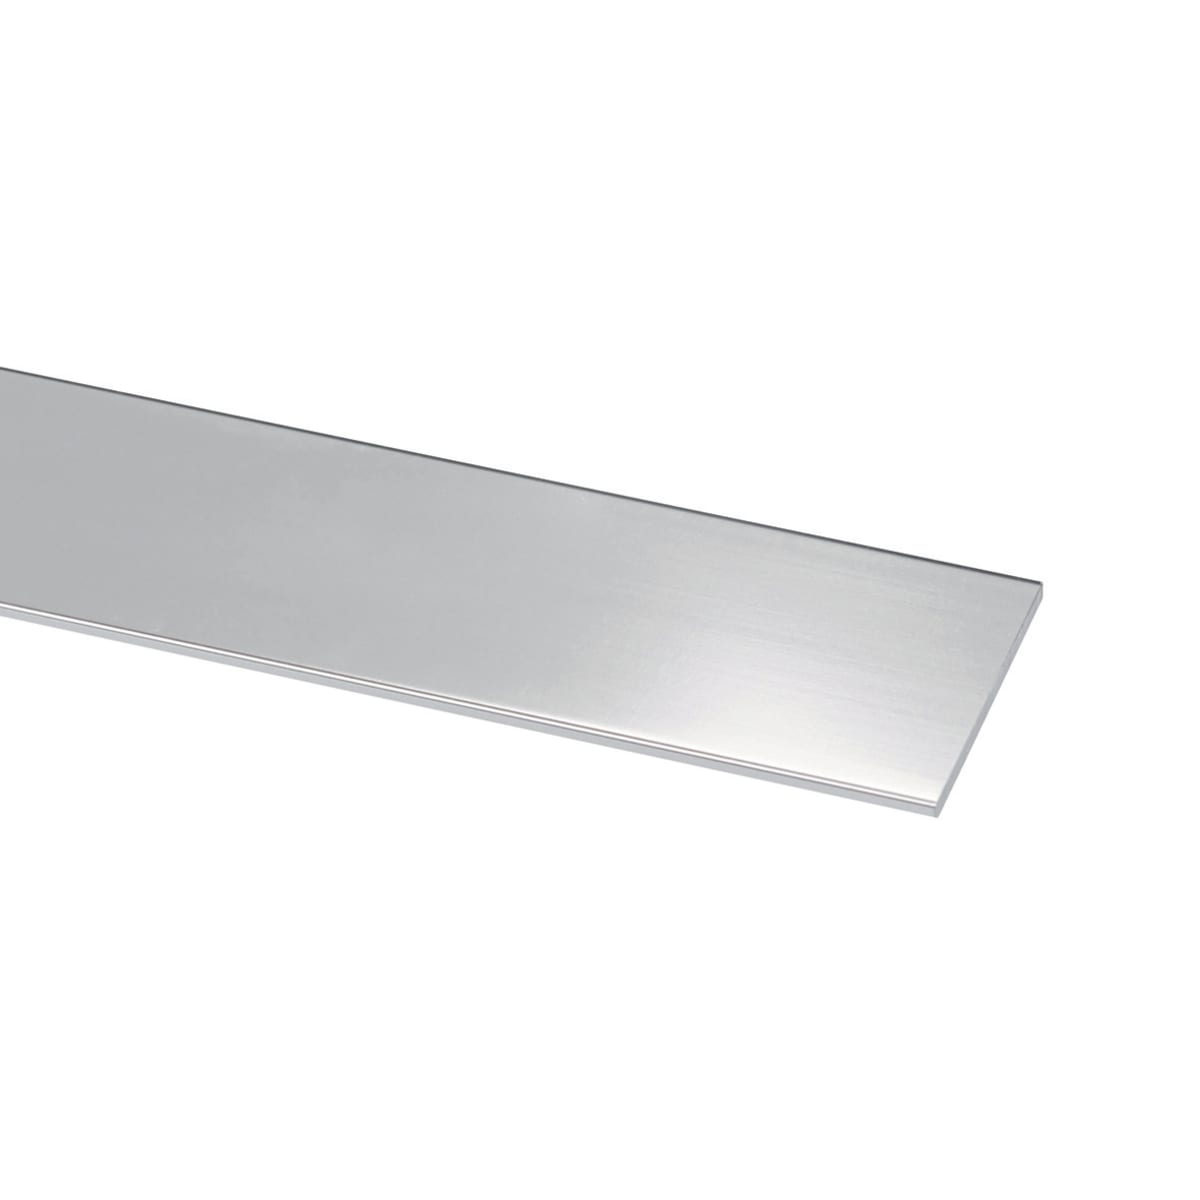 FLAT PROFILE 15X1MM 2MT STAINLESS STEEL AISI 304